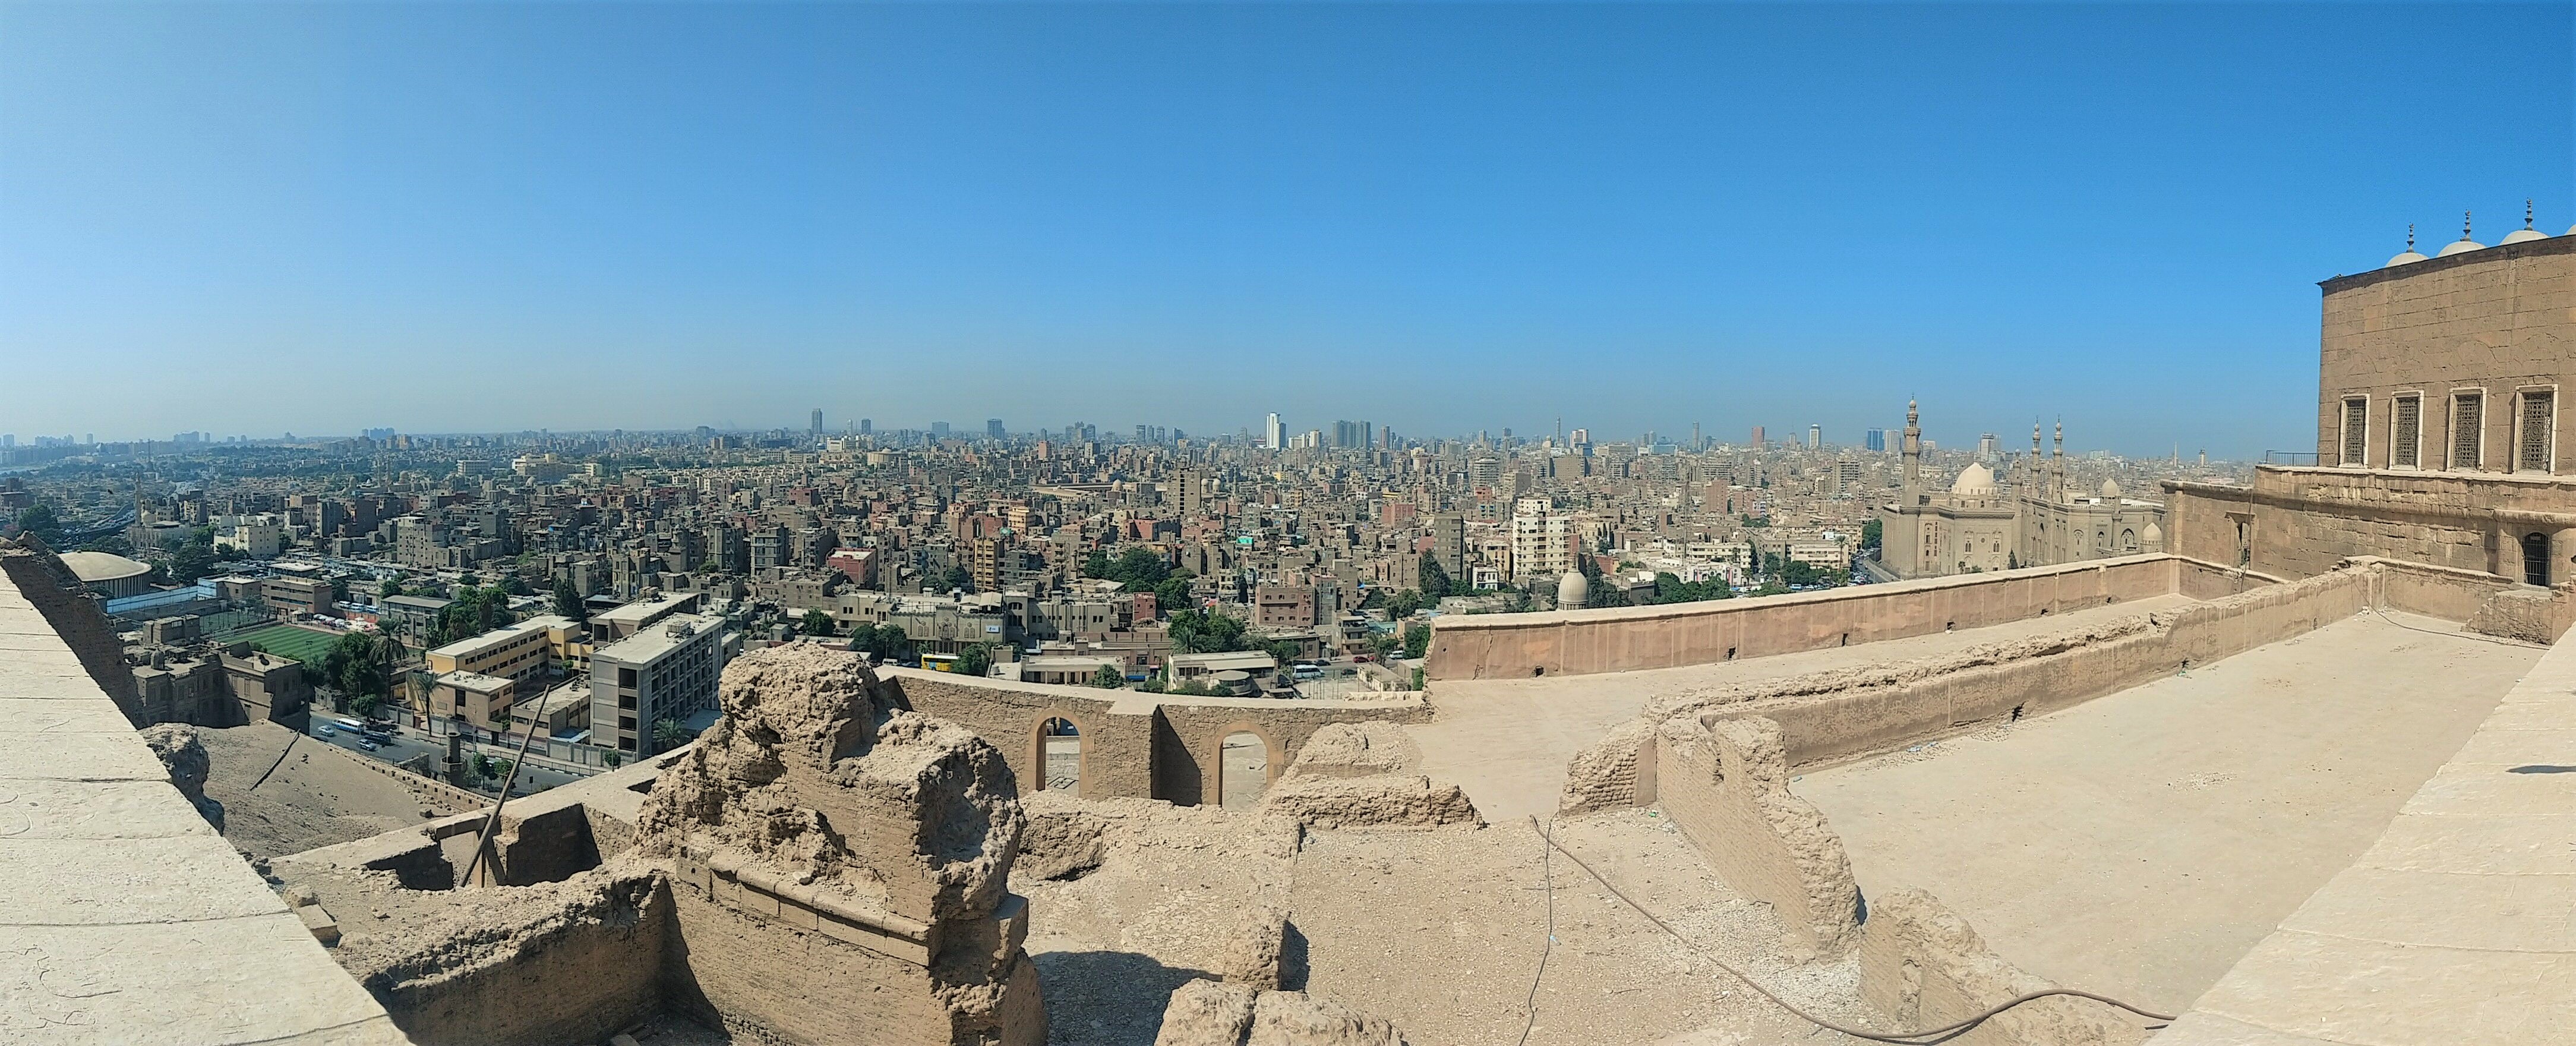 Cairo from the Citadel of Saladin - Egypt